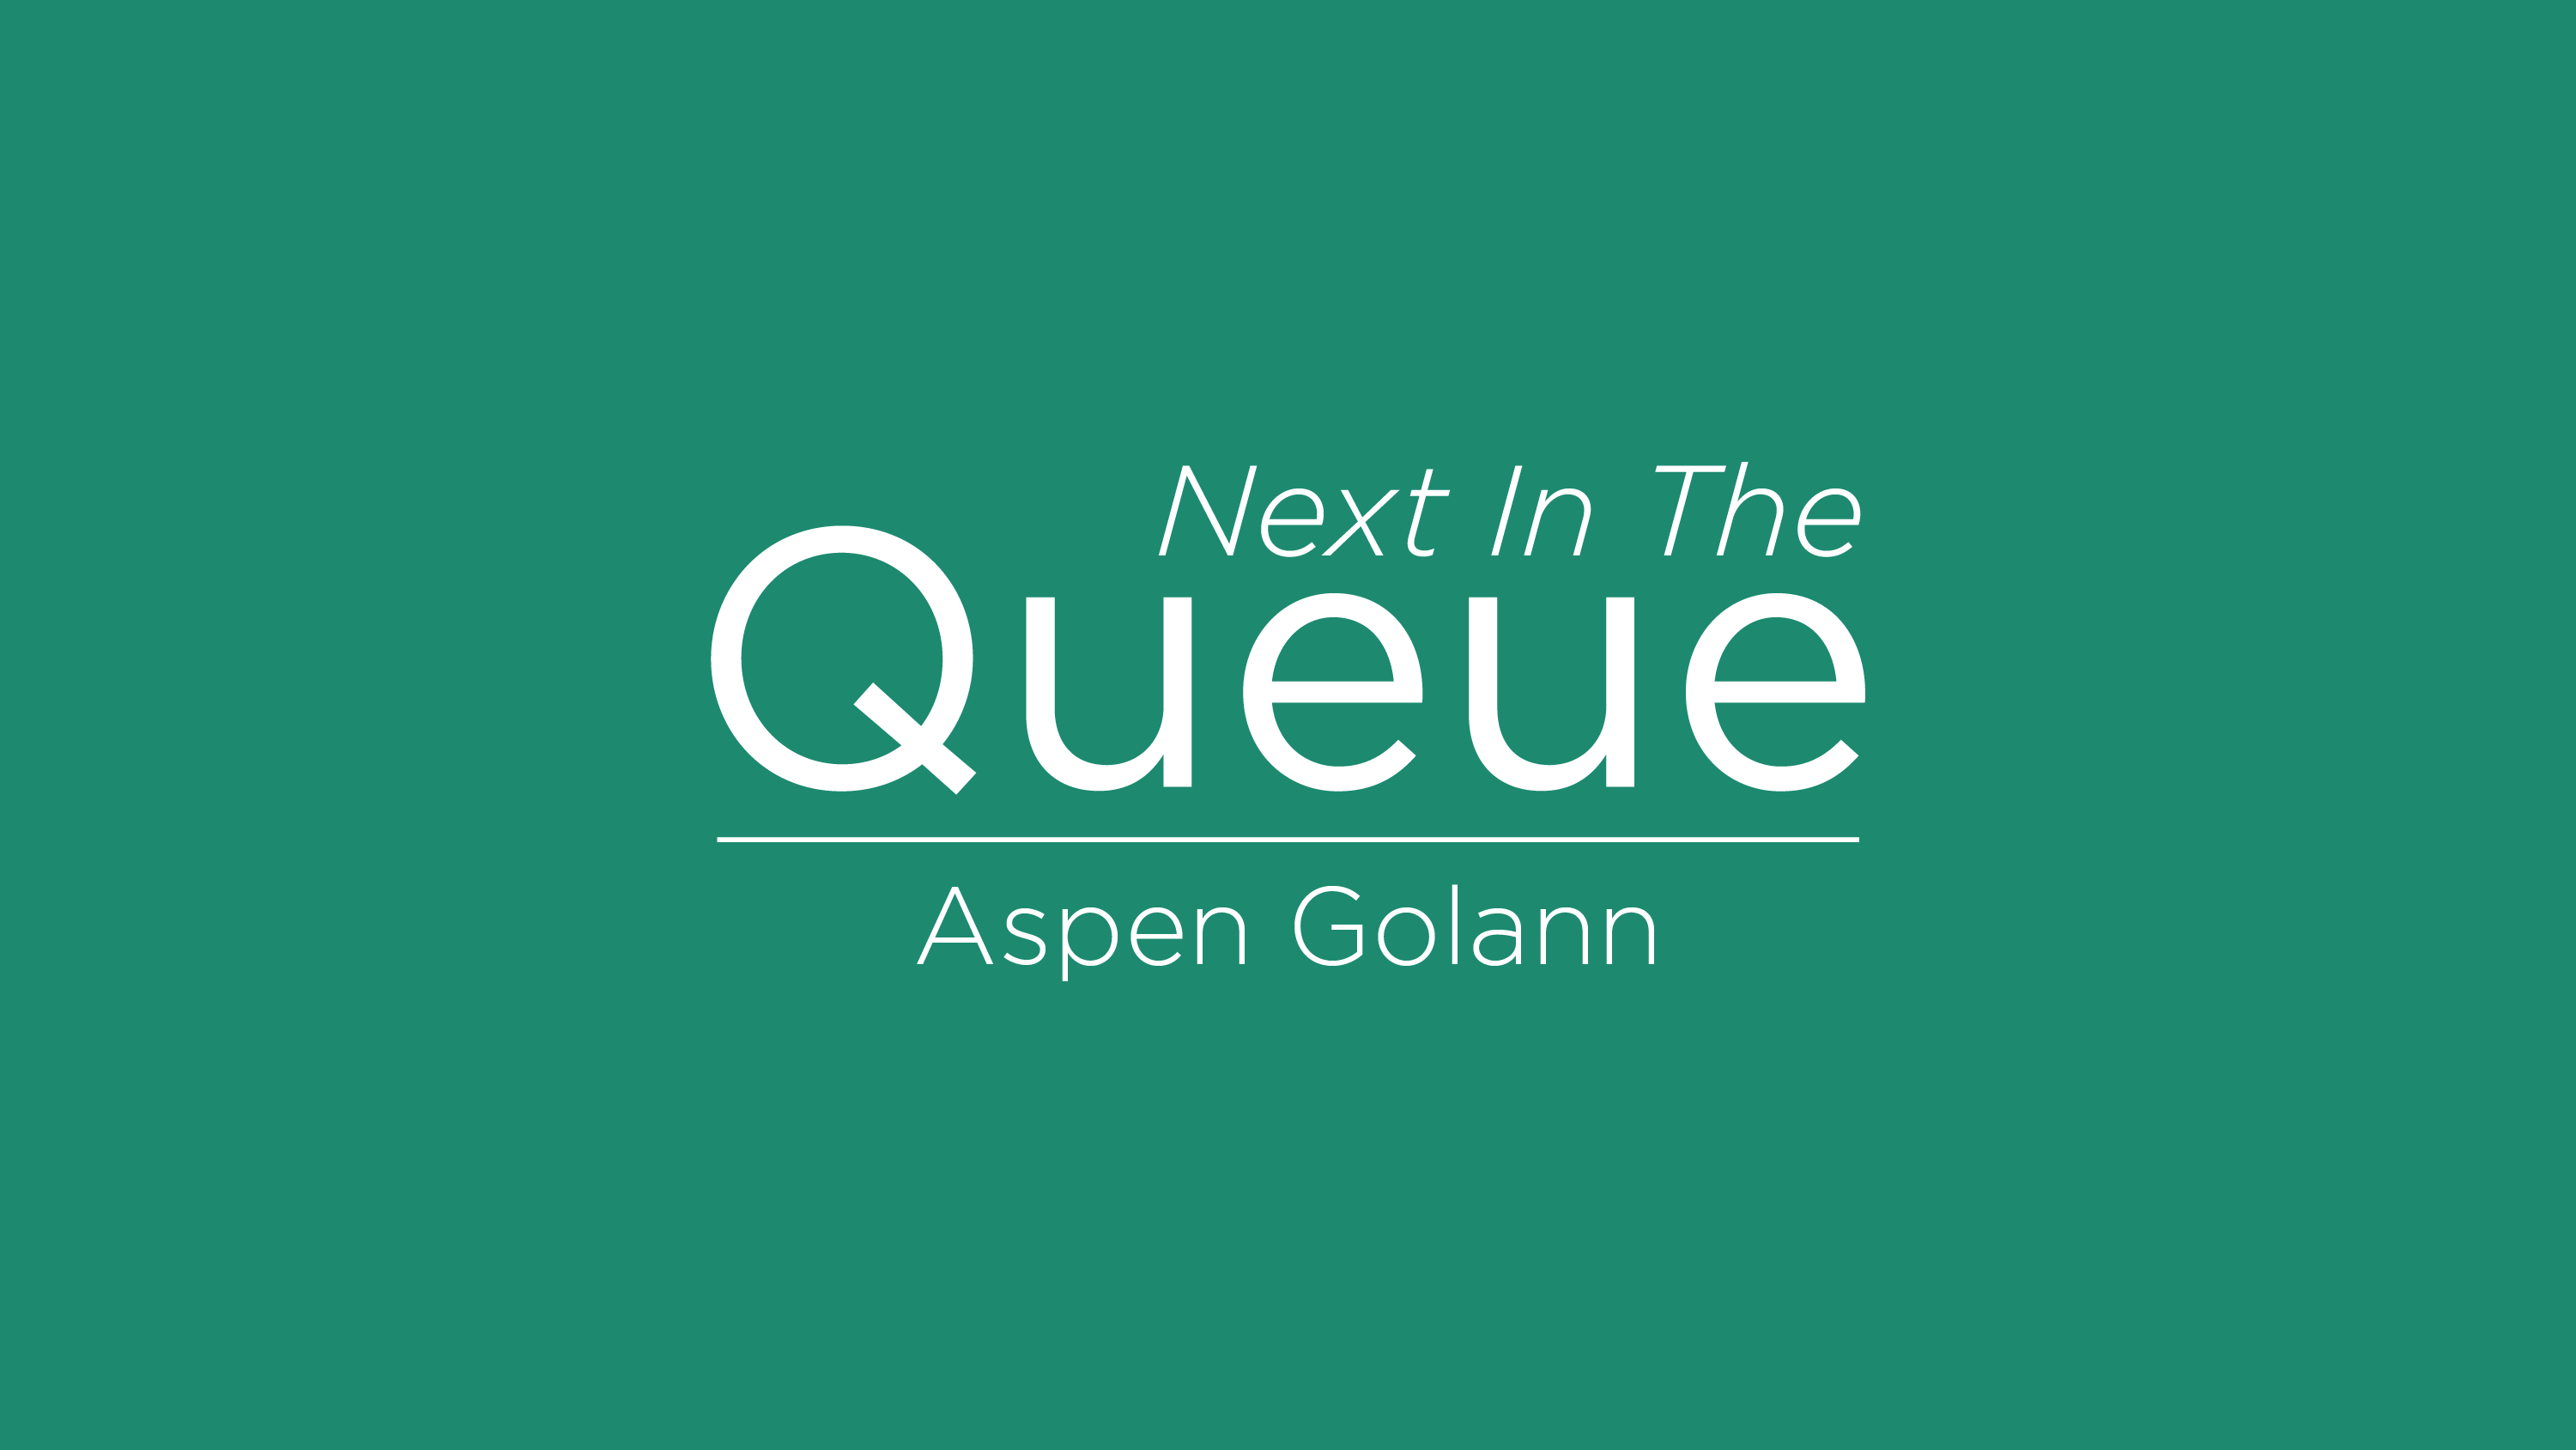 blog post cover graphic for The Queue featuring Aspen Golann